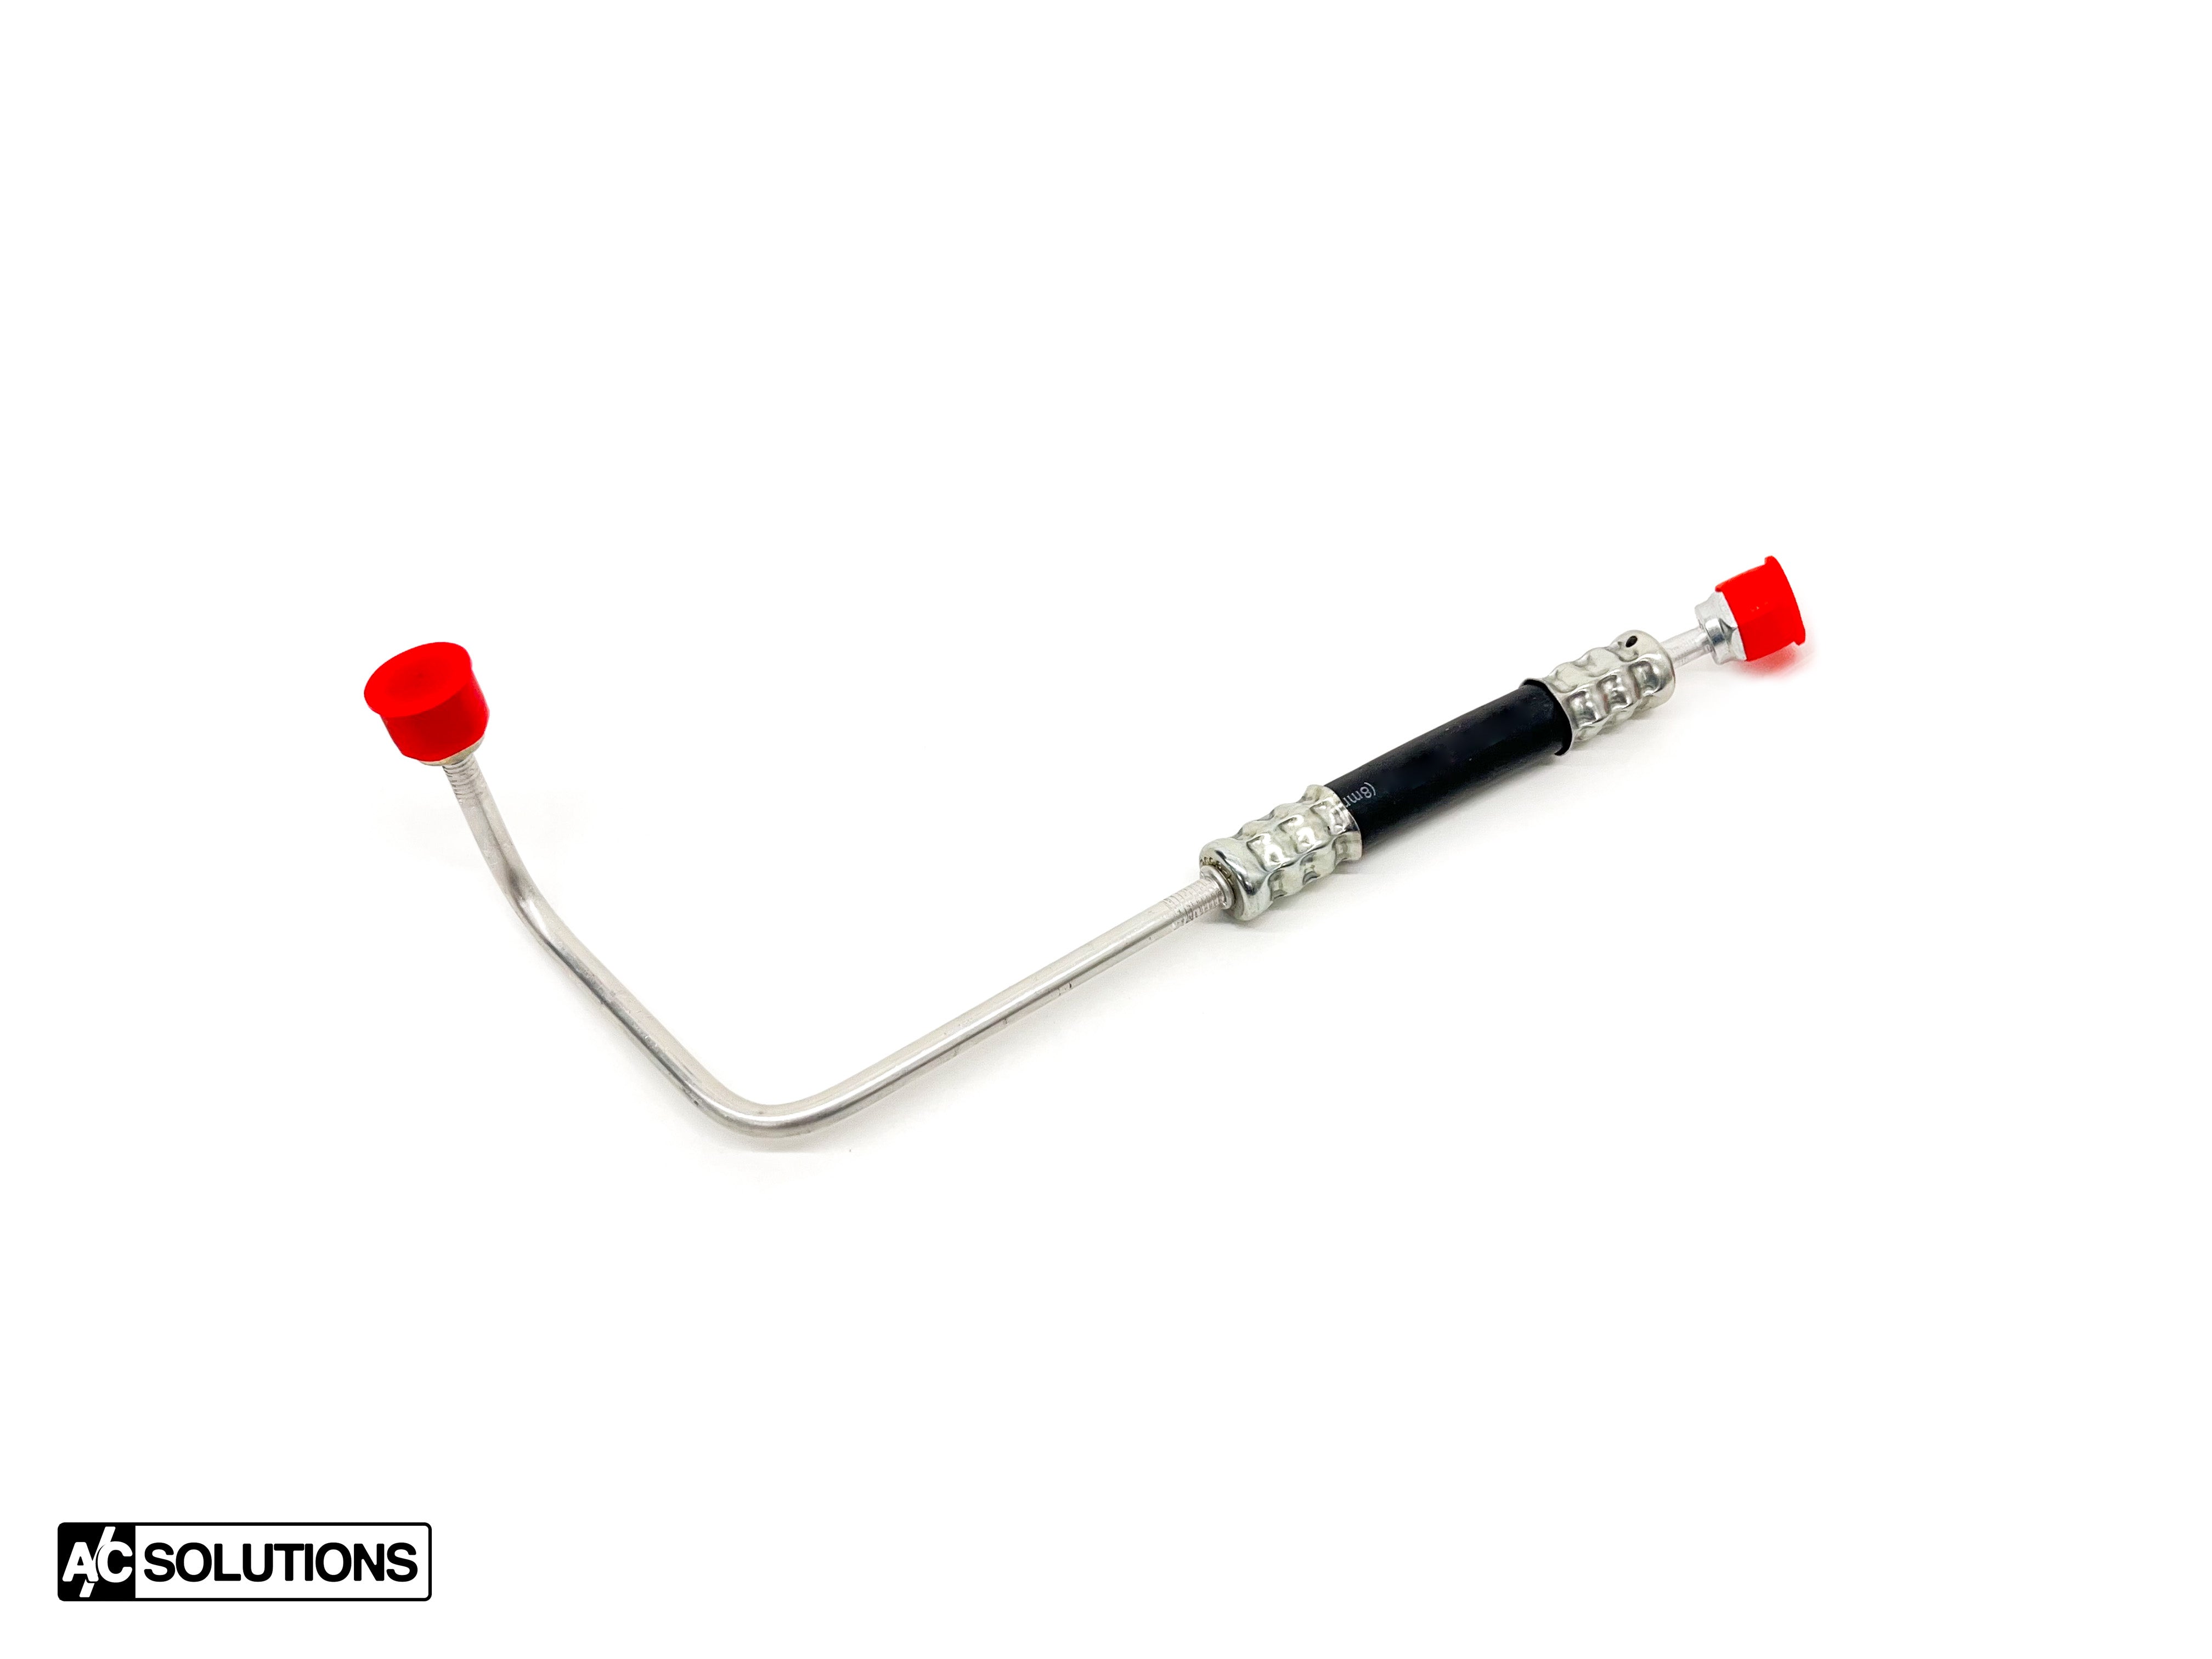 A/C Solutions BMW E30 M3 High-Pressure Condenser Return Line (early model) (64531381405)